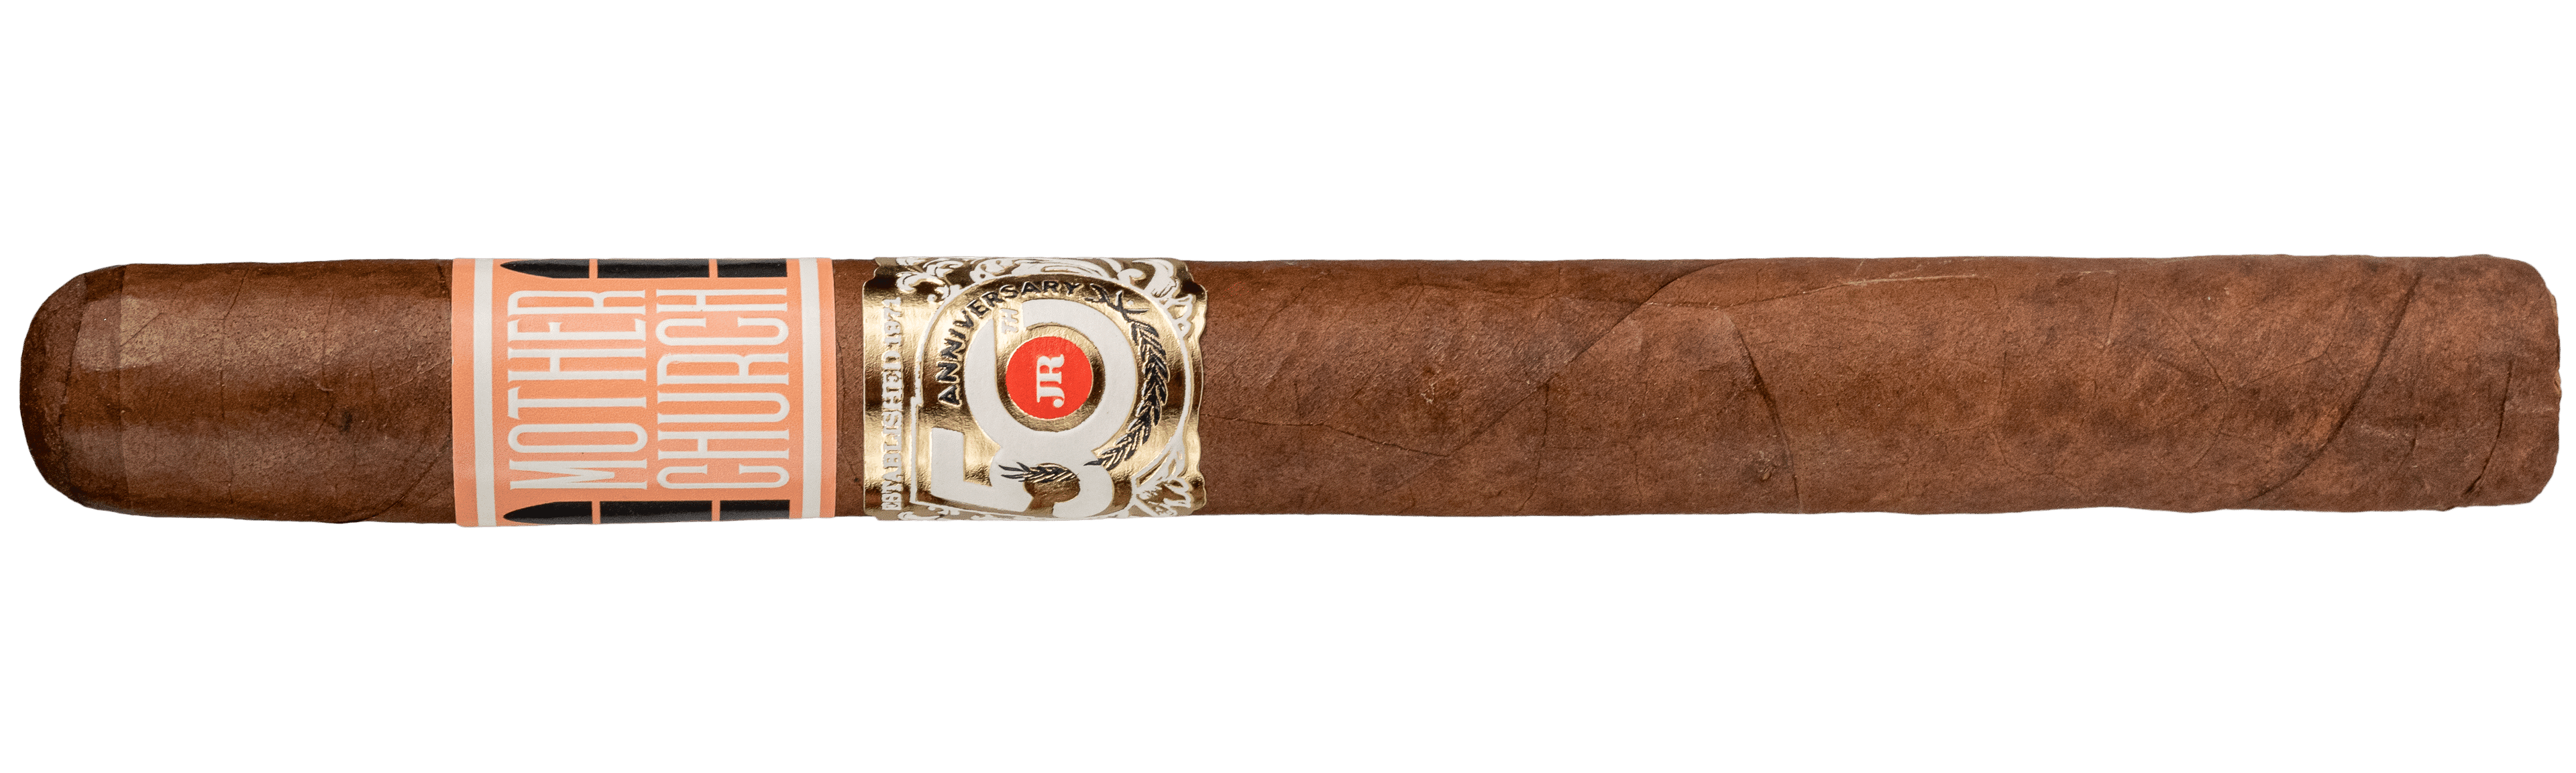 crowned-heads-and-jr-cigar-bring-back-mother-church-–-cigar-news